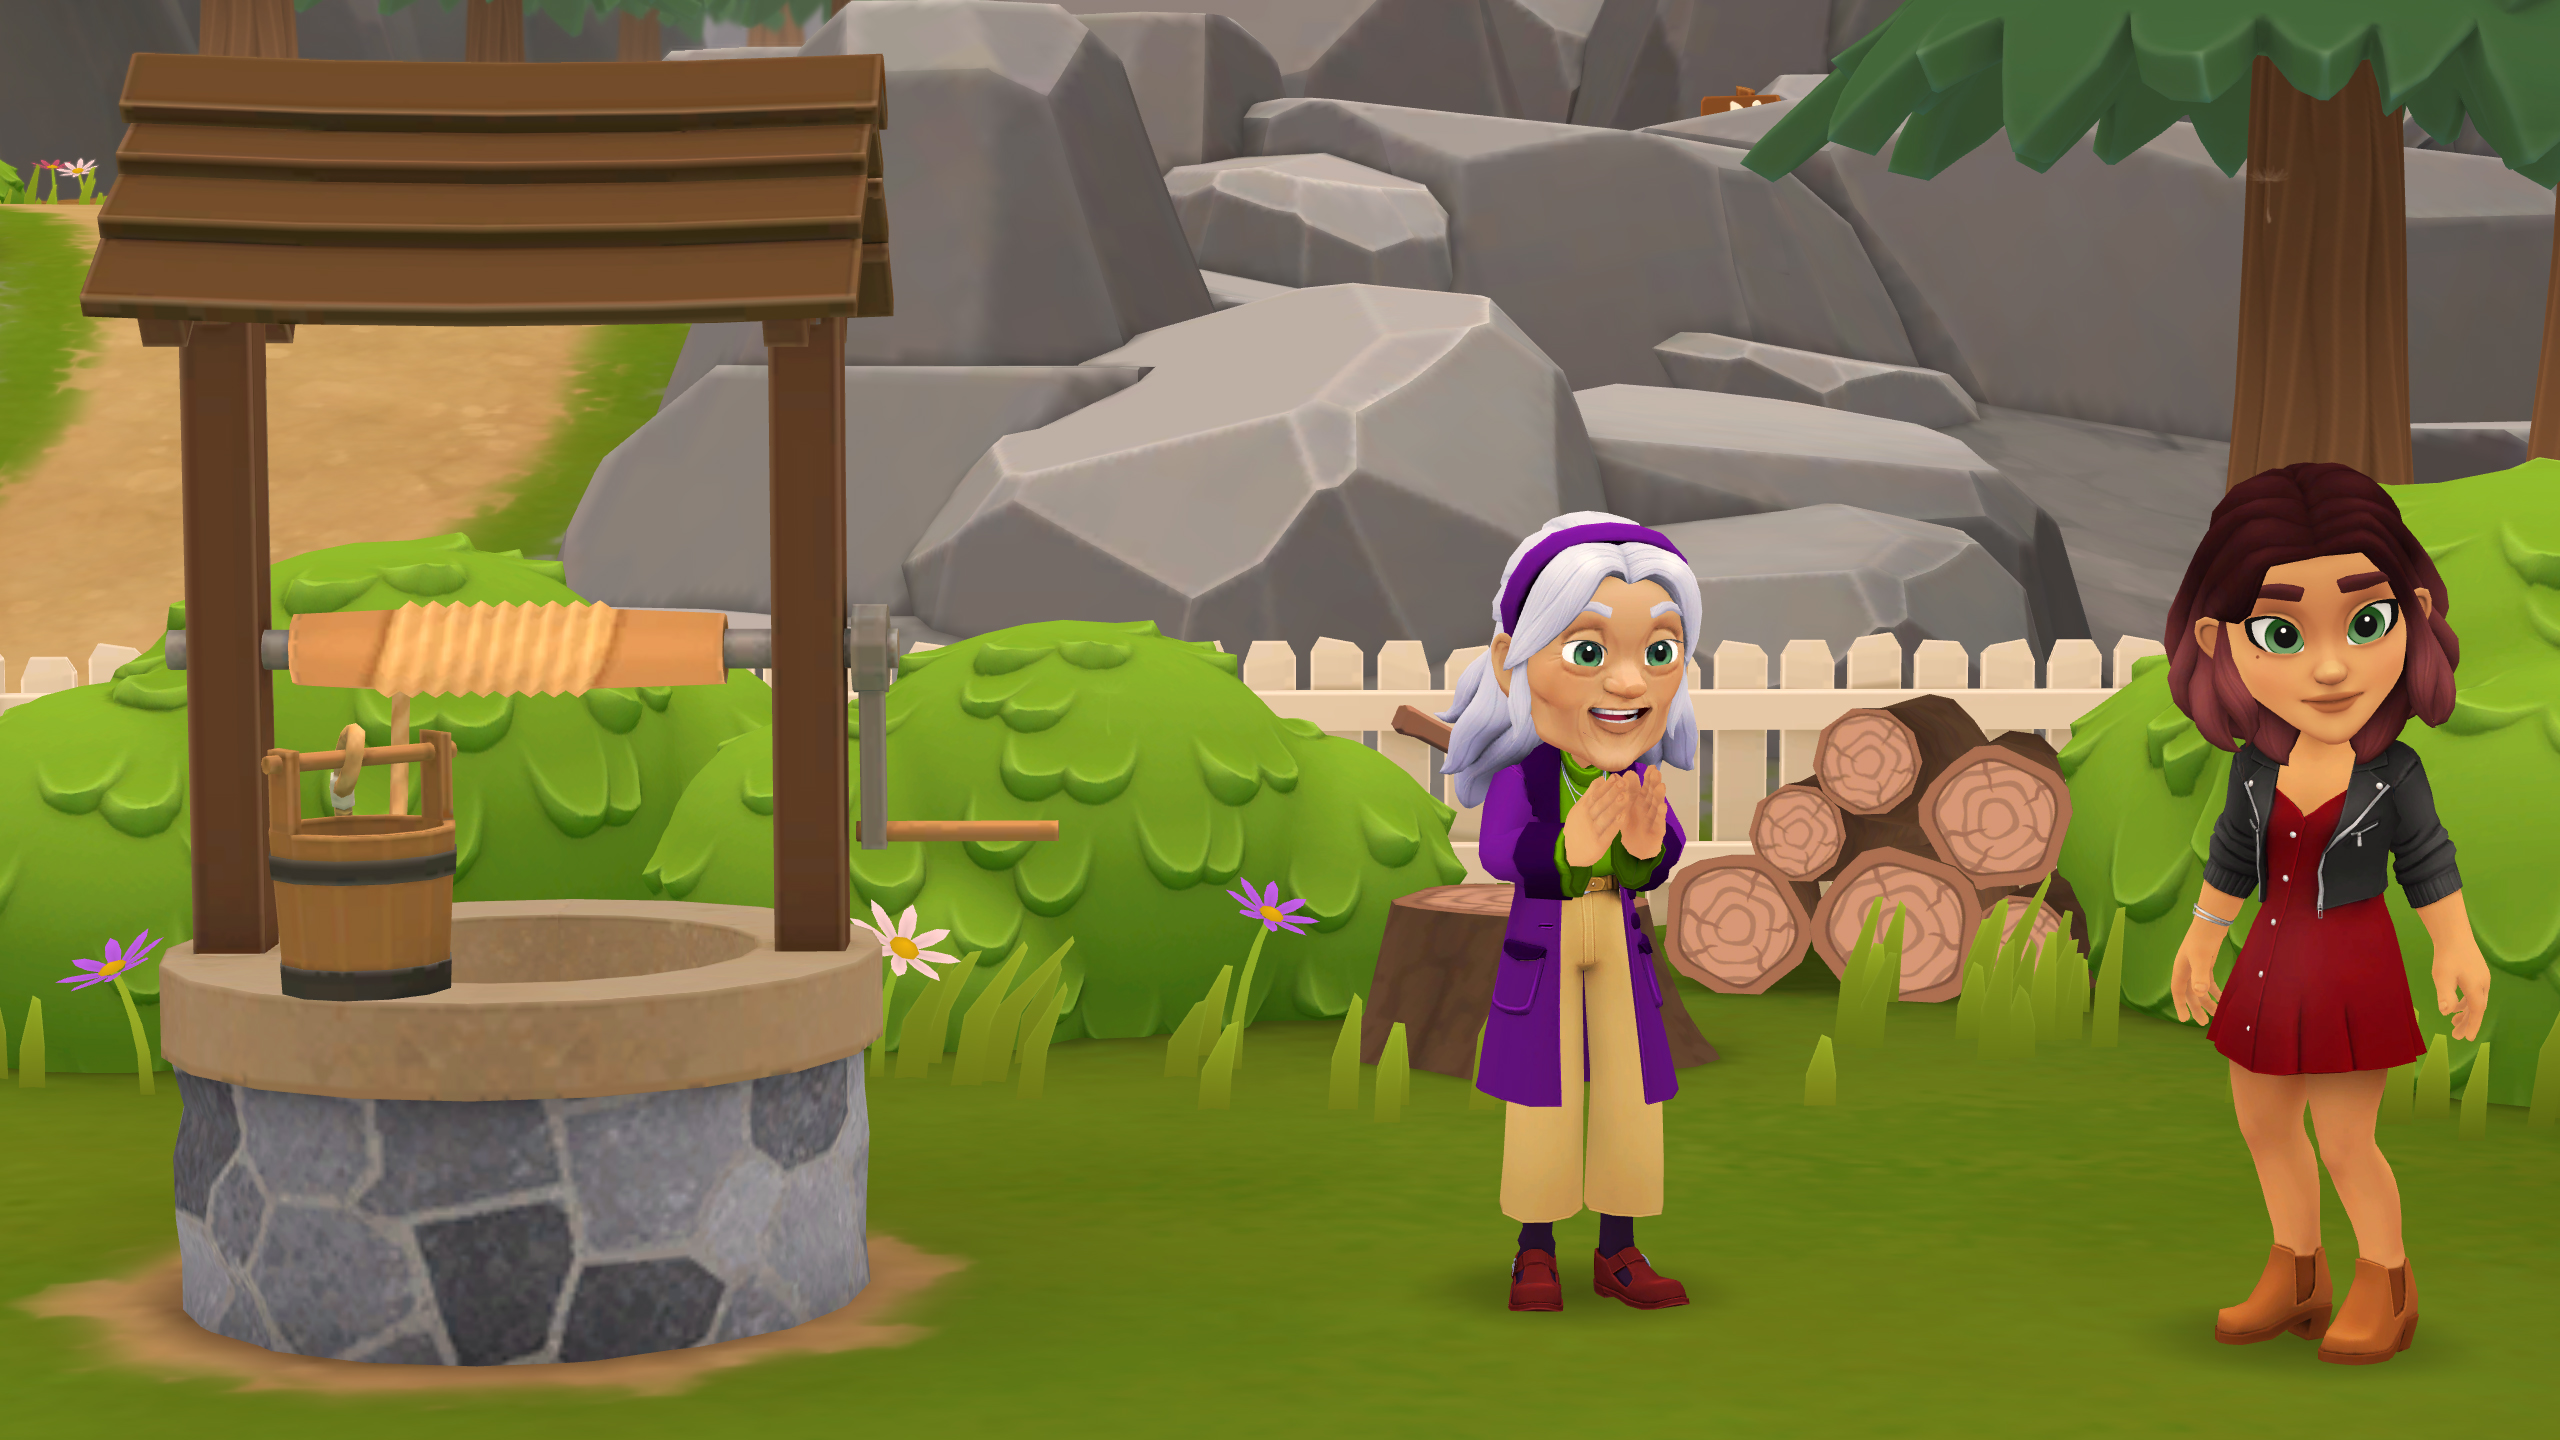 A screenshot from Wylde Flowers. Gramma and Tara are standing next to a well, talking.